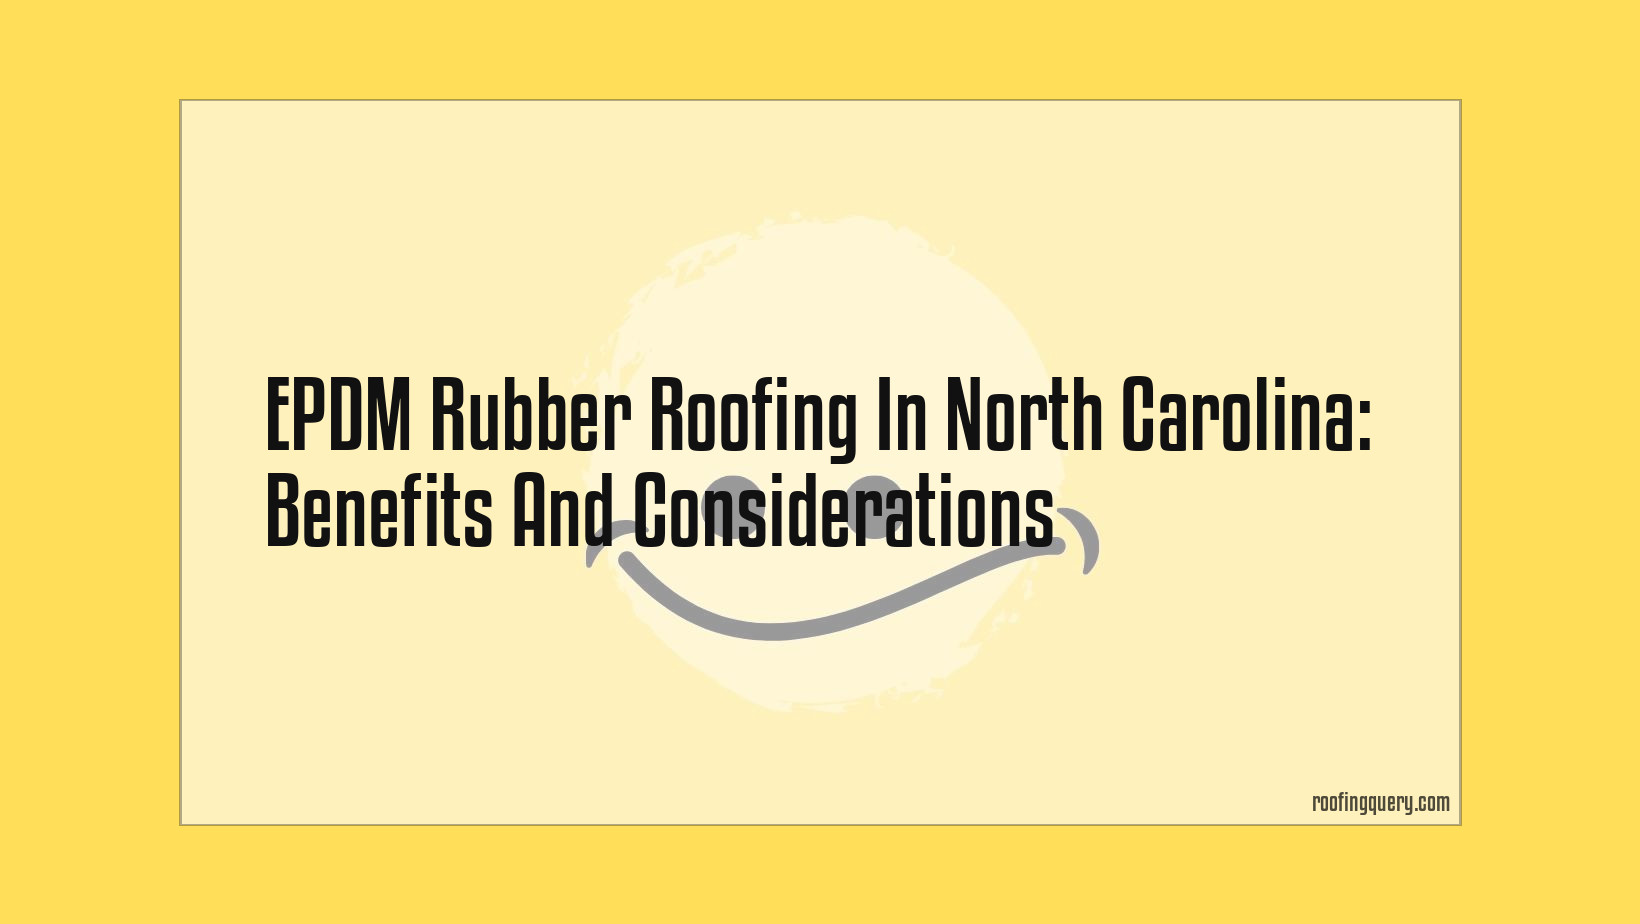 Epdm Rubber Roofing In North Carolina: Benefits And Considerations